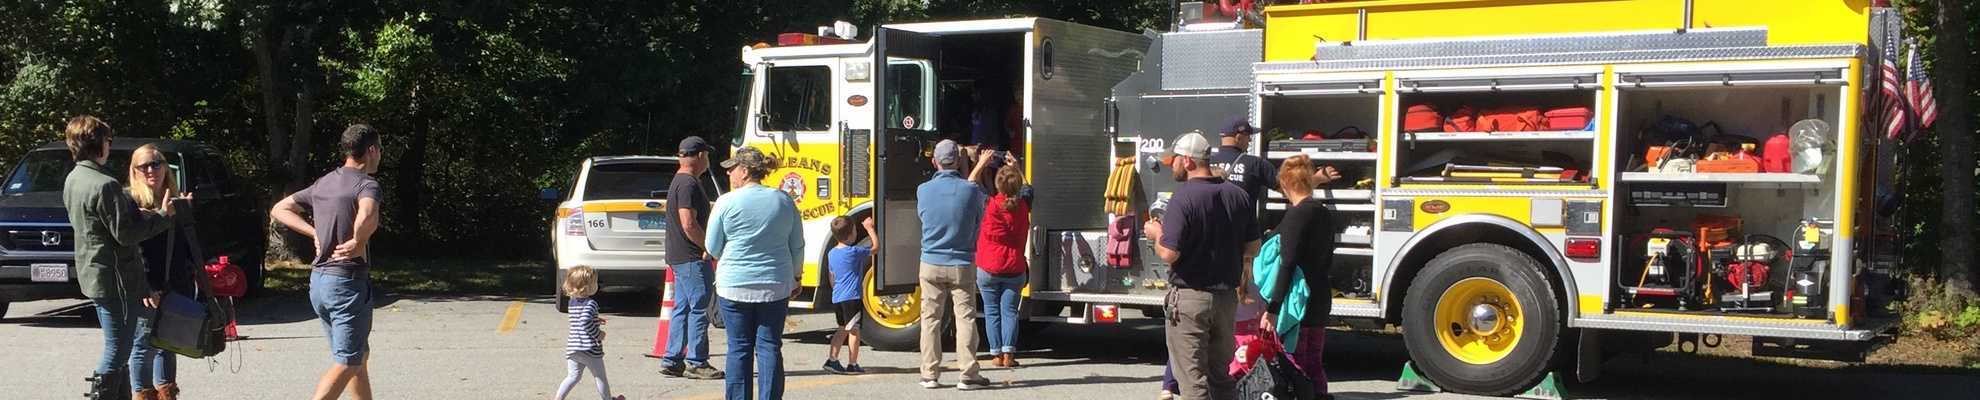 People visiting fire truck